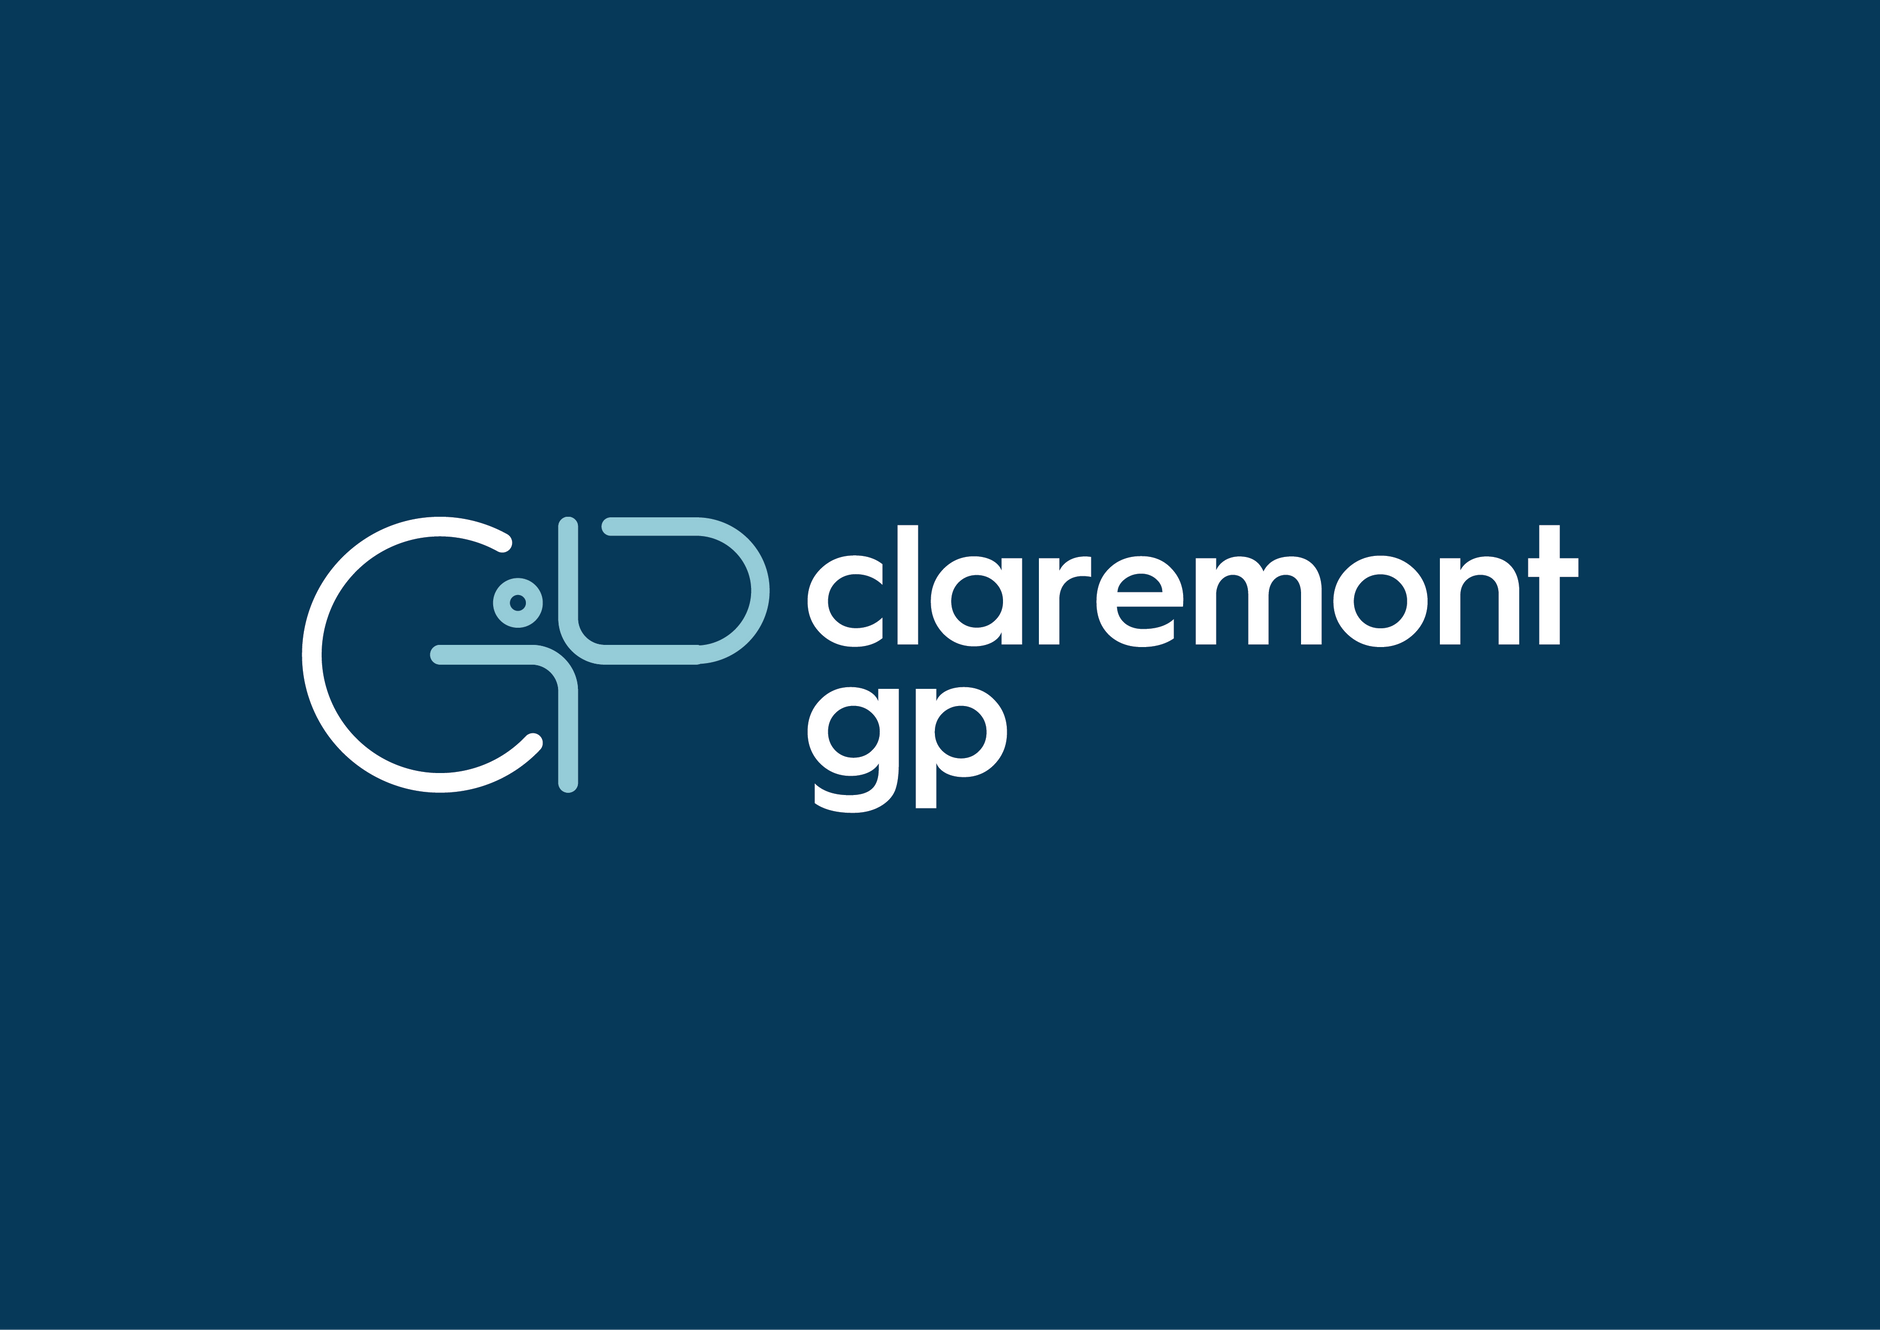 Women's & Men's Care, IV Therapy, Hair Transplantation, & More | ClaremontGP